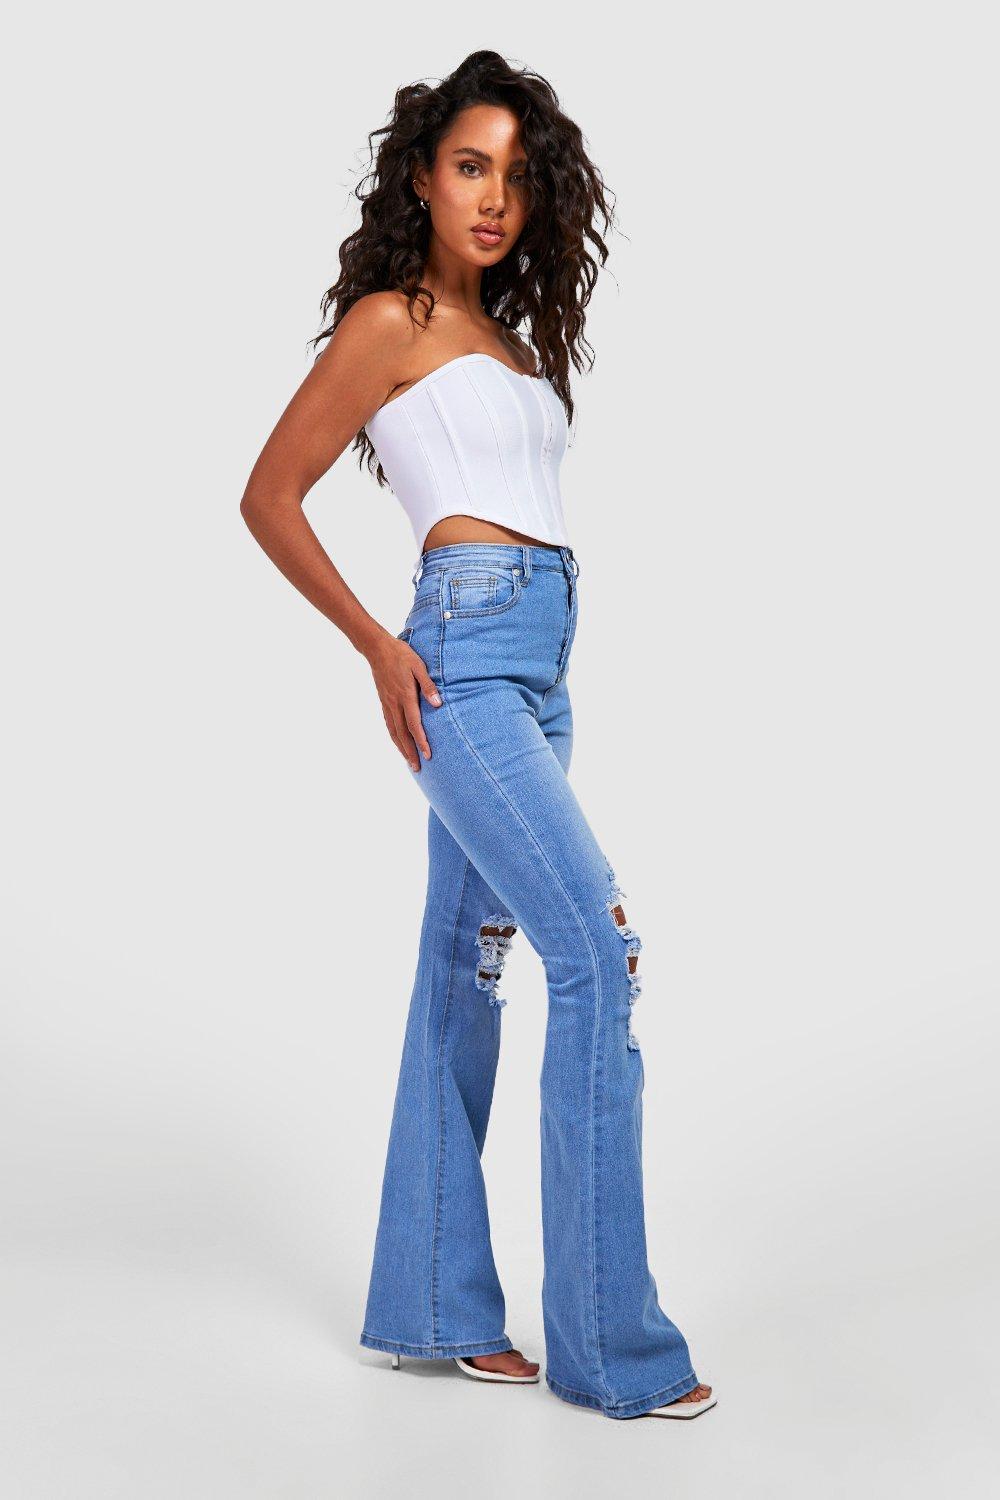 Boohoo Denim Floral High Waisted Flared Jeans in Light Blue Blue Womens Clothing Jeans Flare and bell bottom jeans 